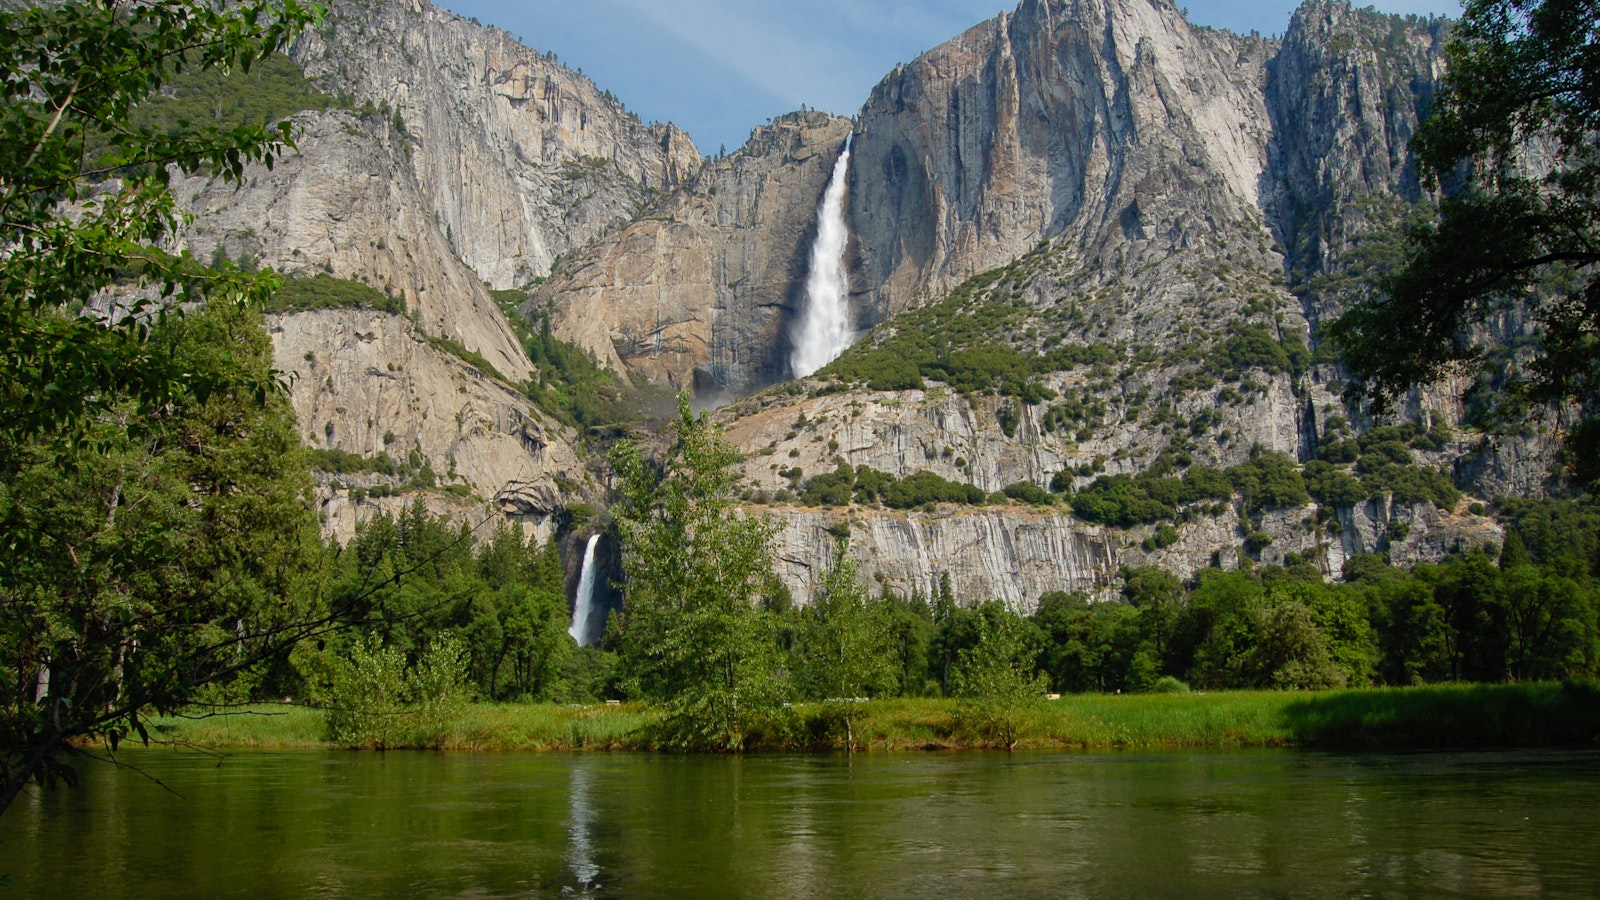 View up towards a large and smaller waterfall cascading down from a rocky mountain